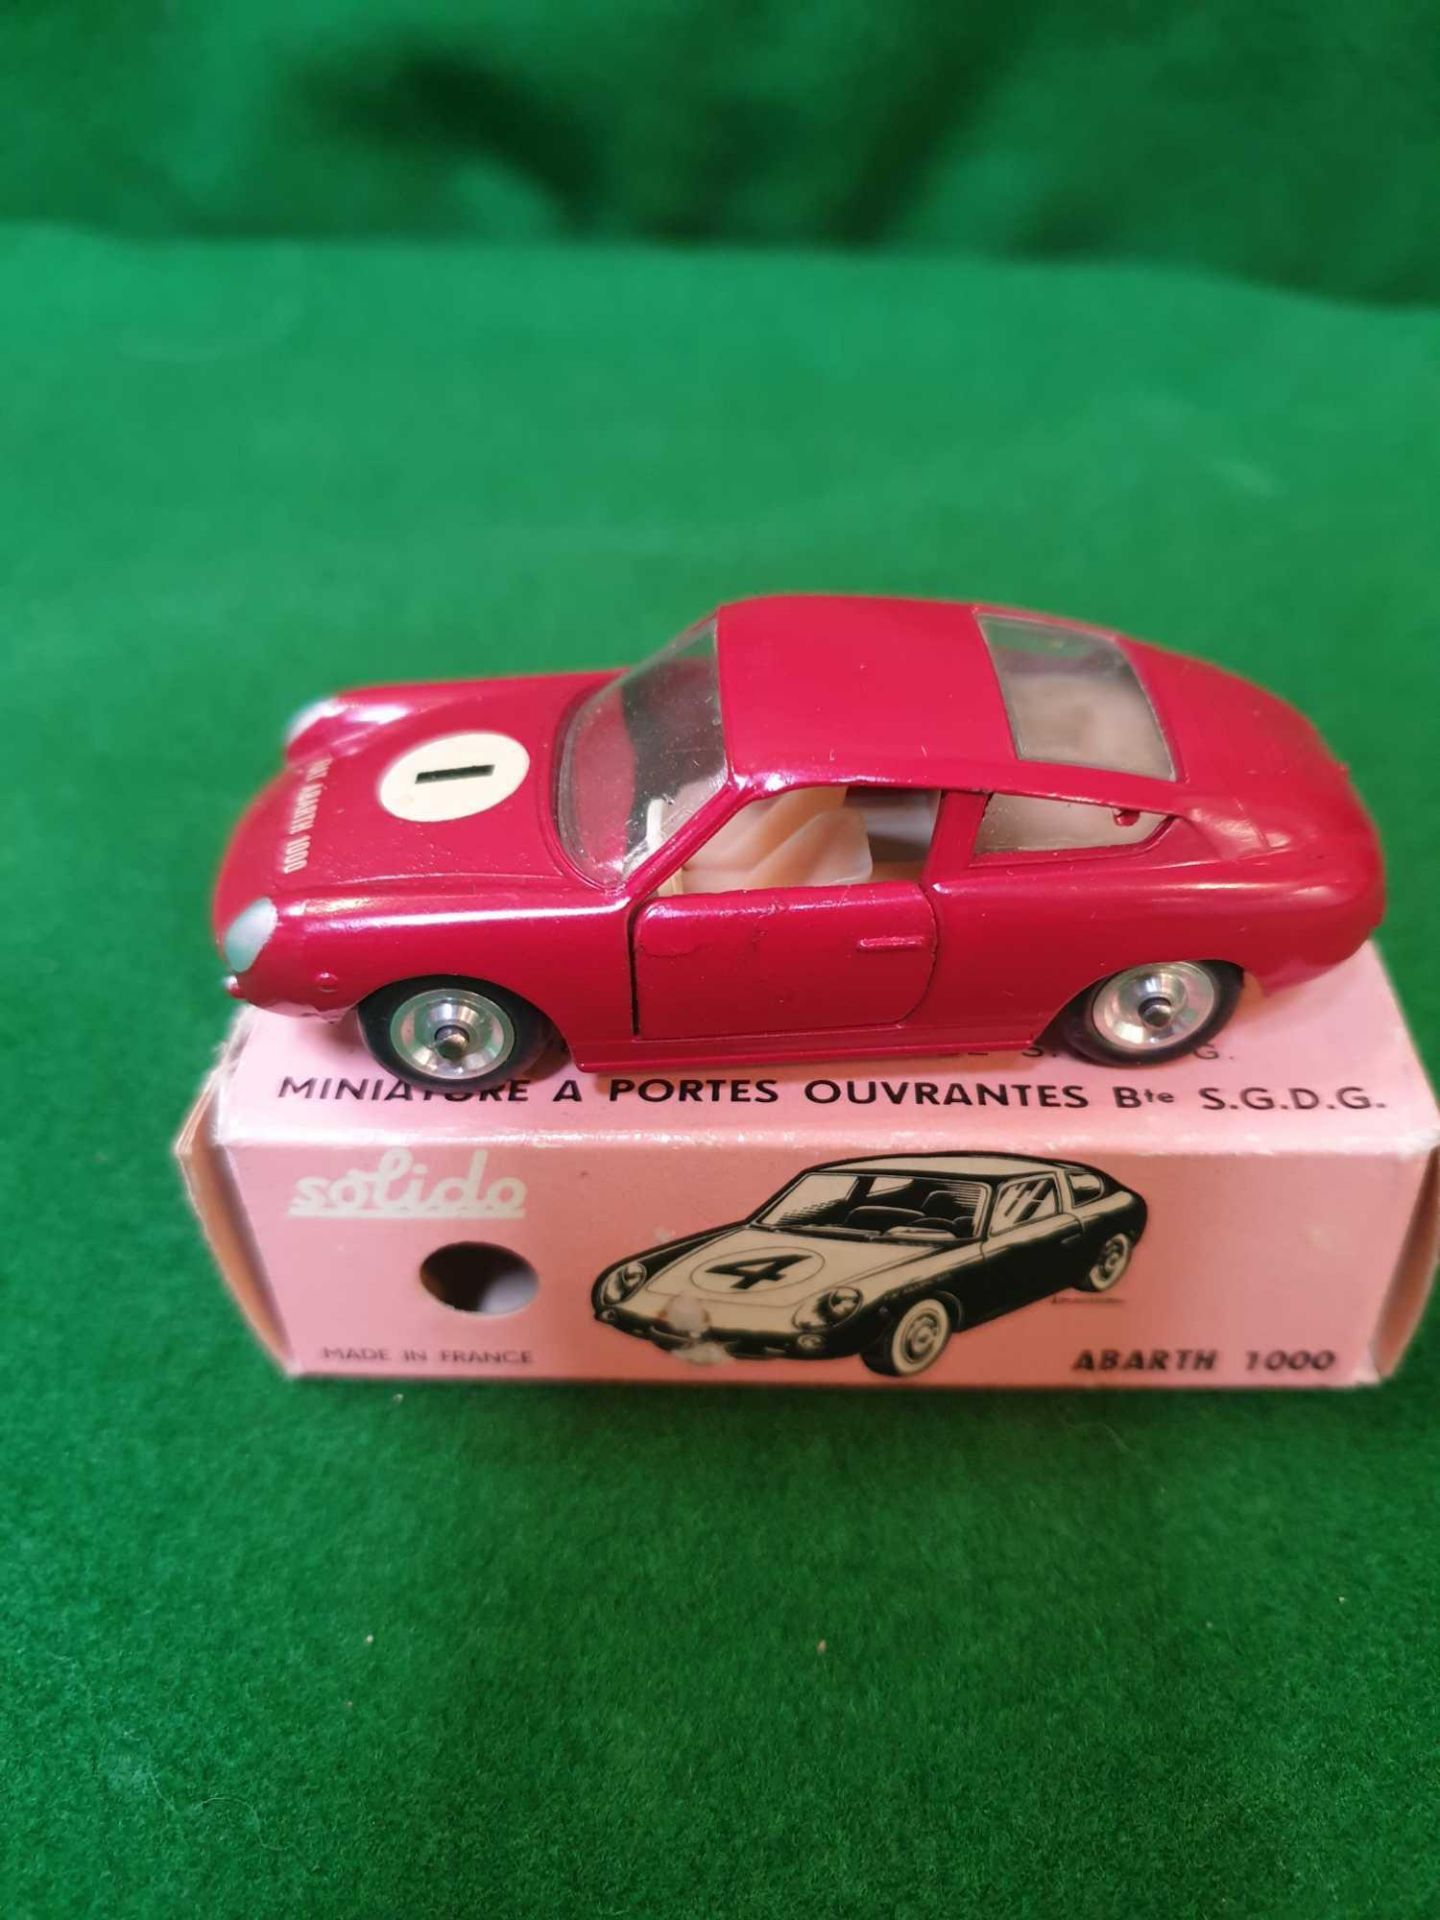 Solido #124 - Fiat Abarth 1000 - Red Racing No.1 Pink Box Mint Model In Excellent Box